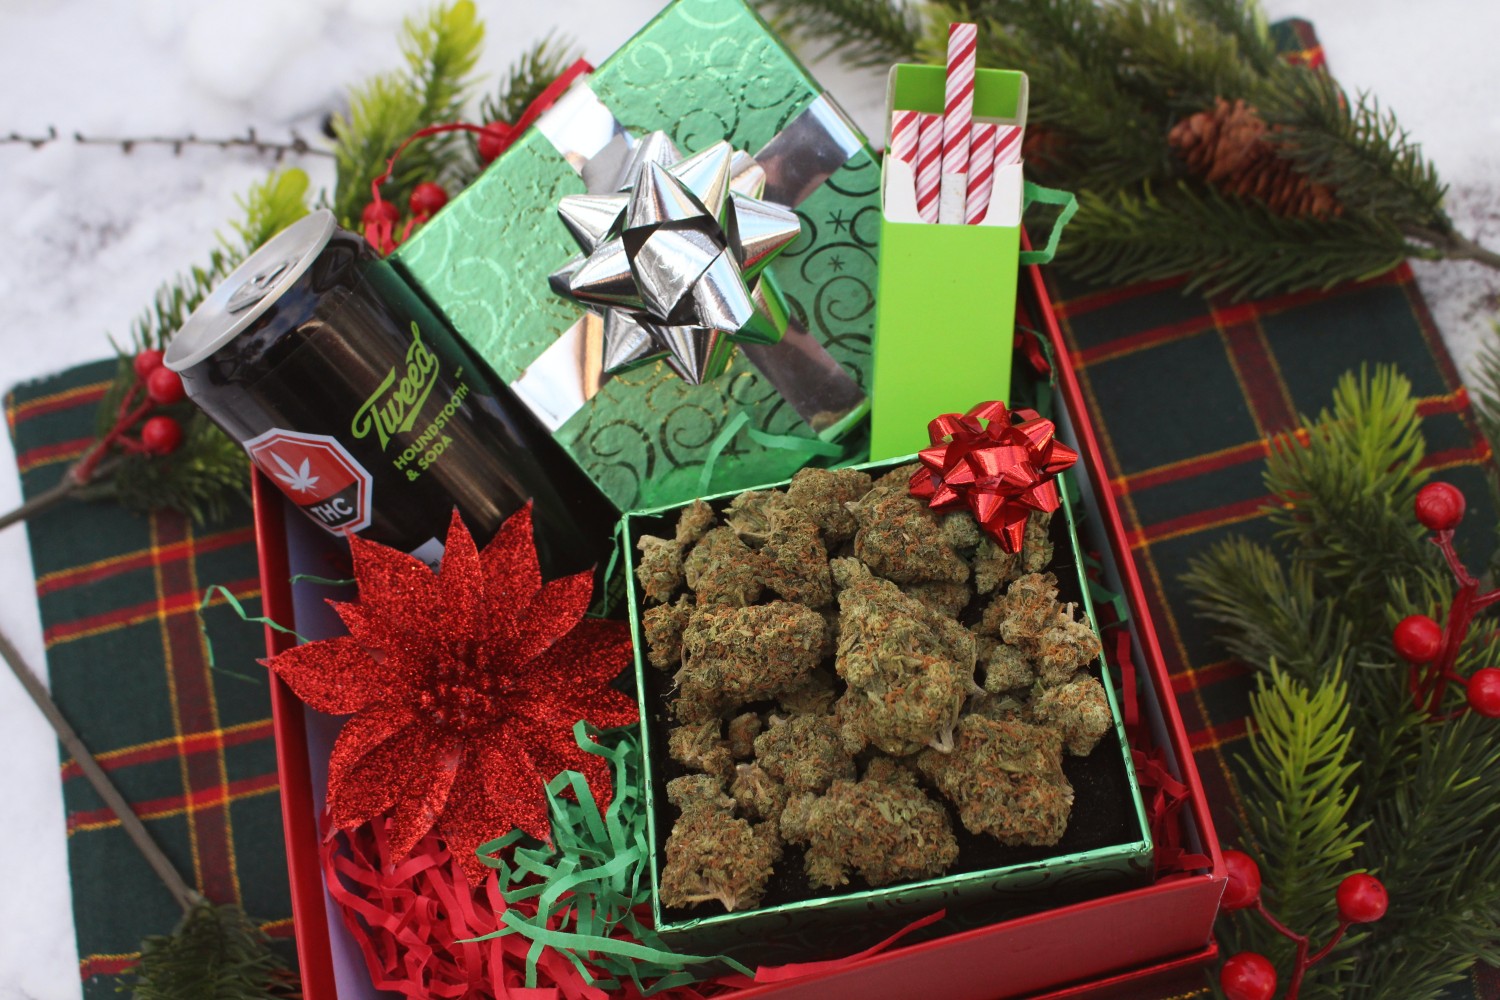 The Best Cannabis Products to Gift for the Holidays